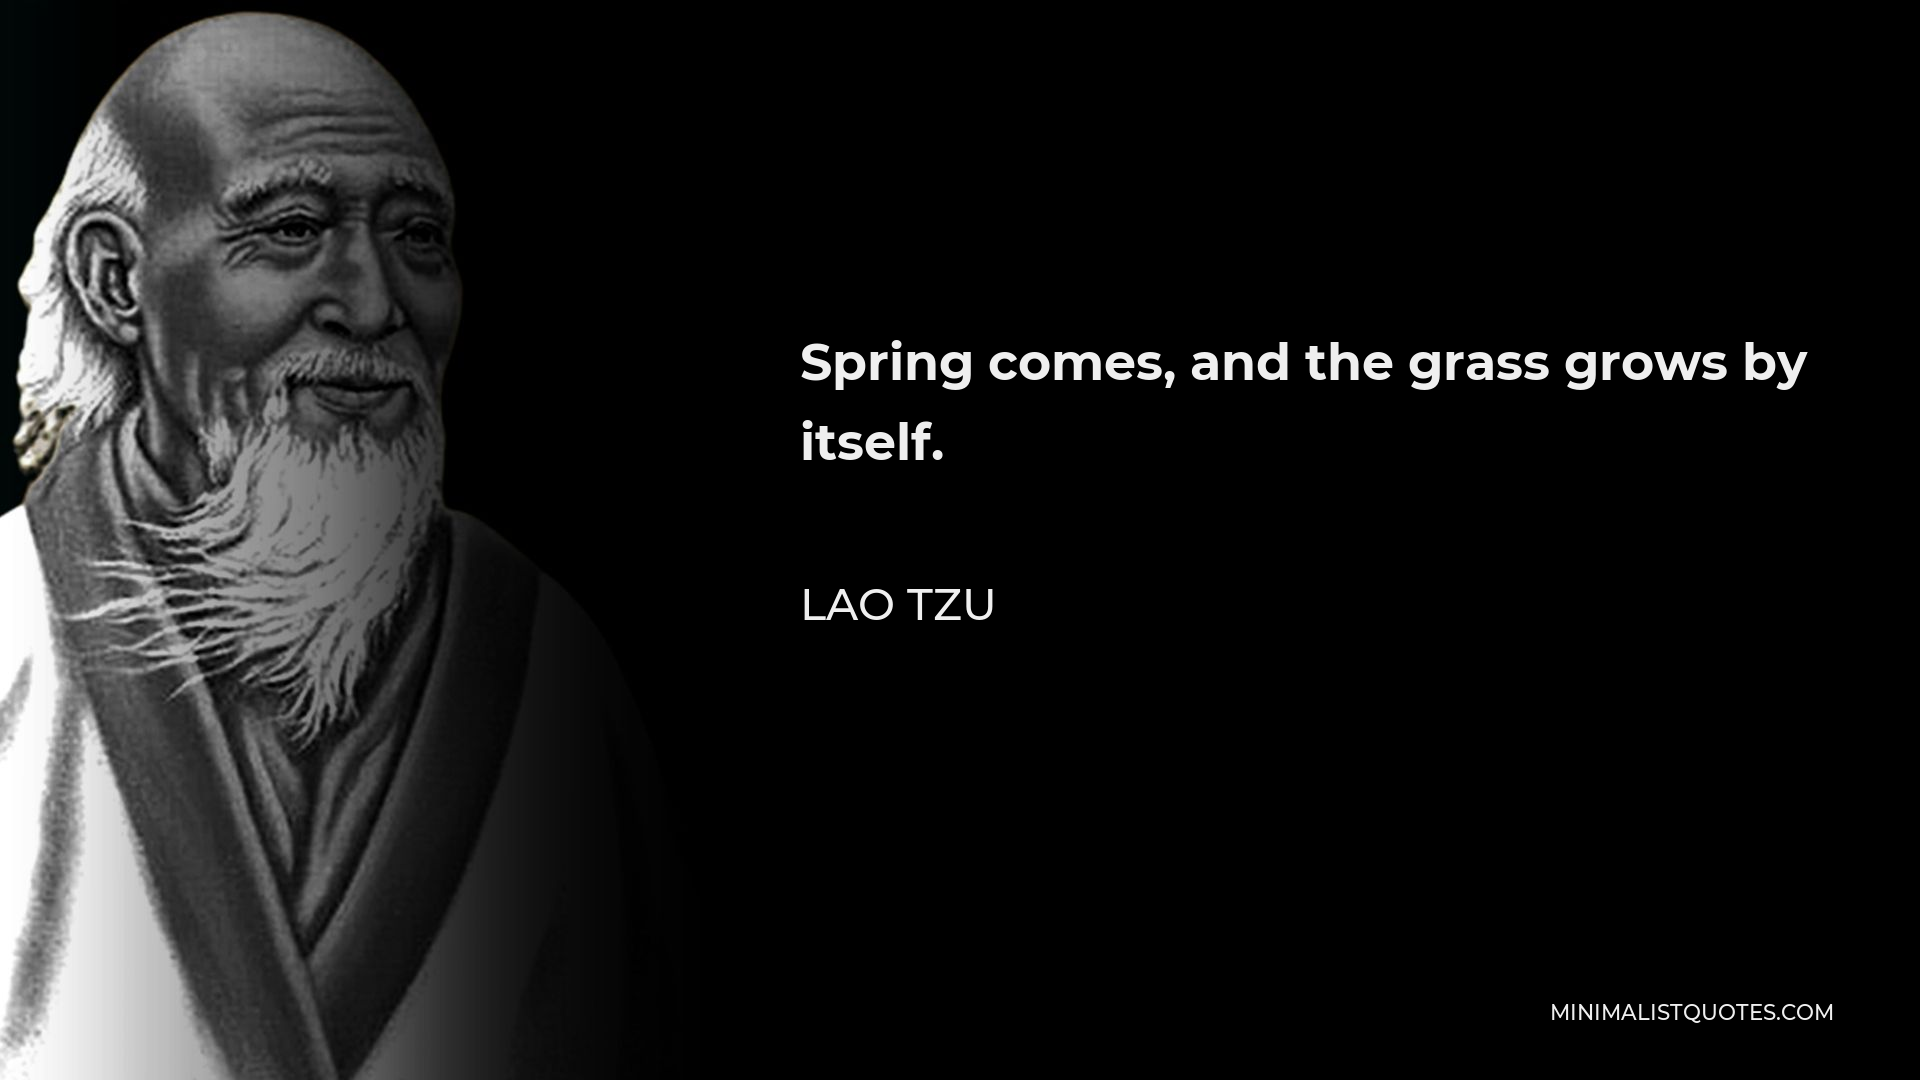 Lao Tzu Quote - Spring comes, and the grass grows by itself.